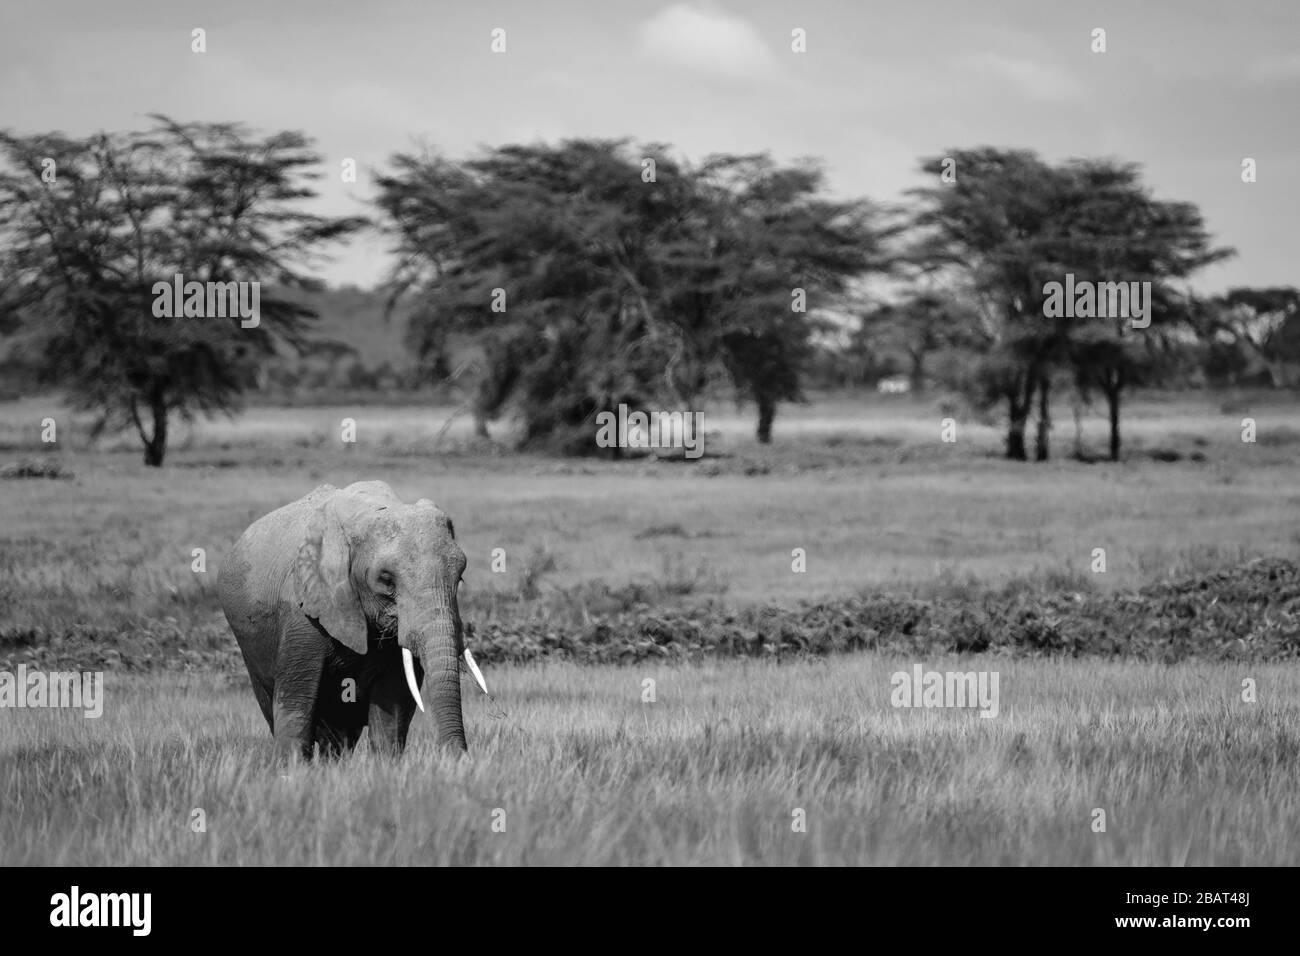 A lone Elephant in the grass with trees in the background, Amboseli National Park, Kenya in Black and White Stock Photo